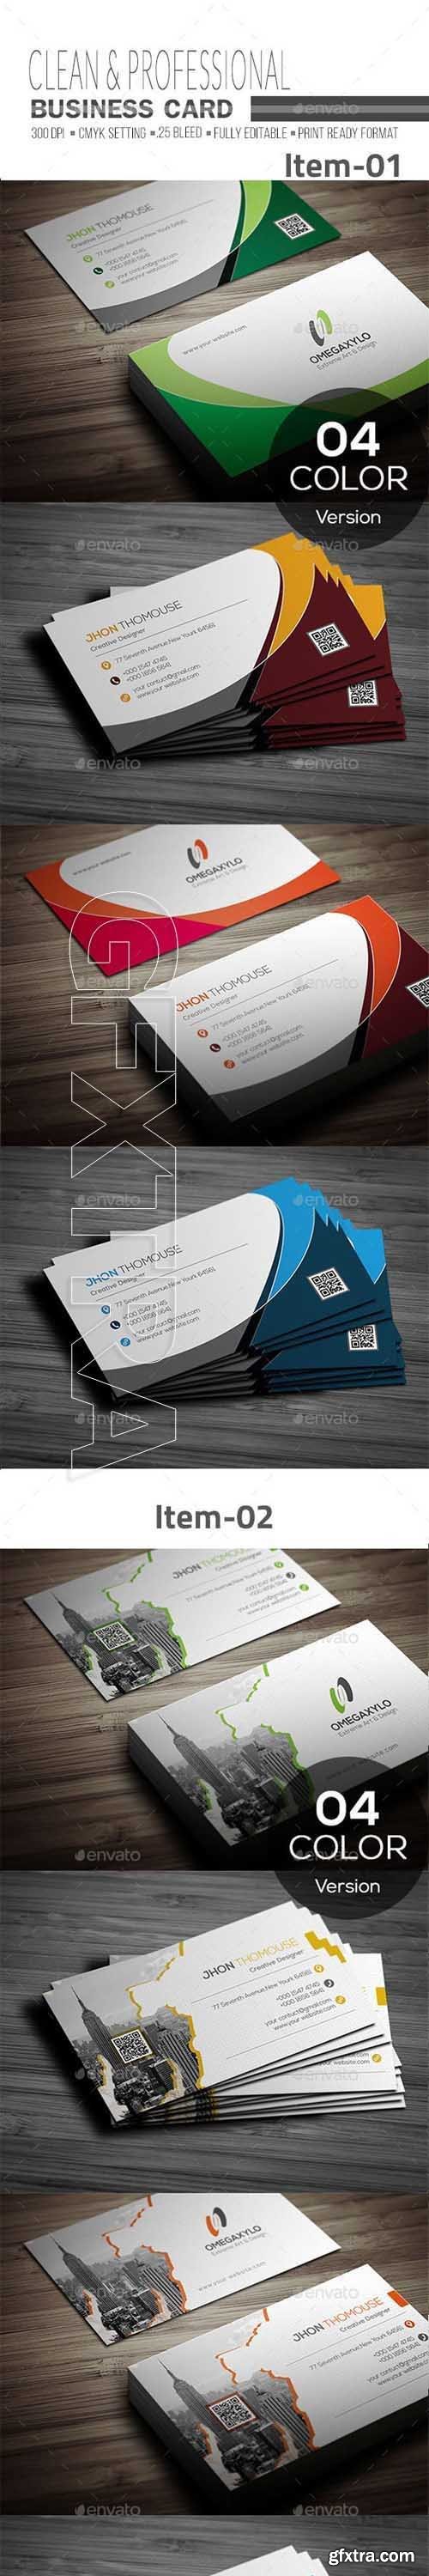 GraphicRiver - Business Card Bundle 2 In 1 20402377